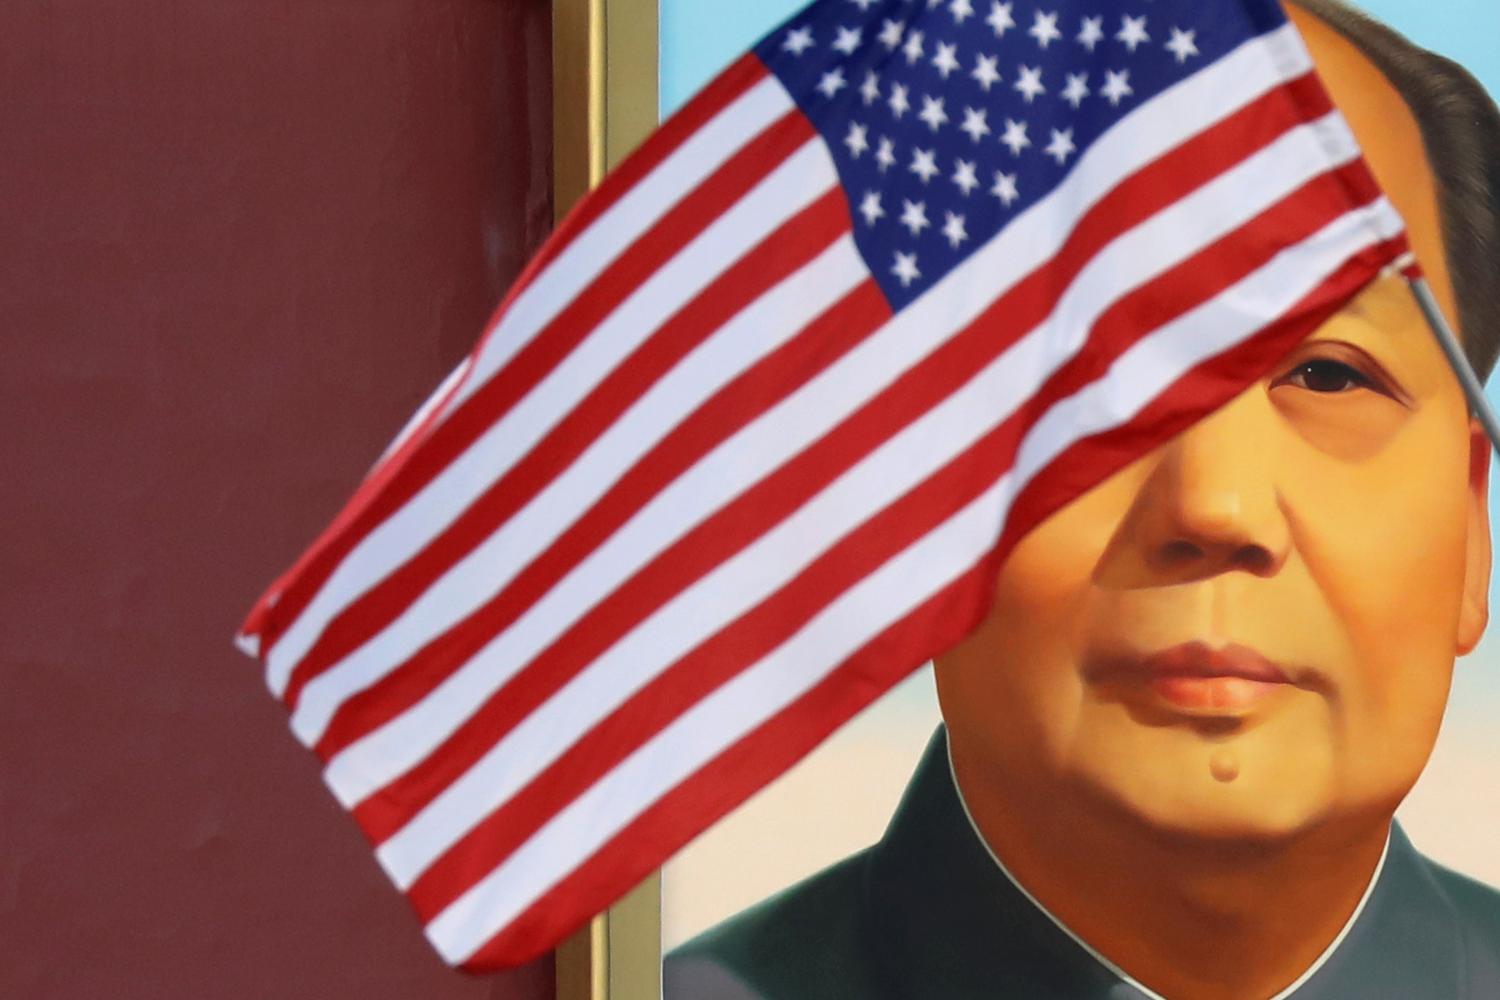 A U.S. flag flutters in front of a portrait of the late Chinese Chairman Mao Zedong at Tiananmen gate during the visit by U.S. President Donald Trump to Beijing, China, November 8, 2017. REUTERS/Damir Sagolj - RC1564EC0810